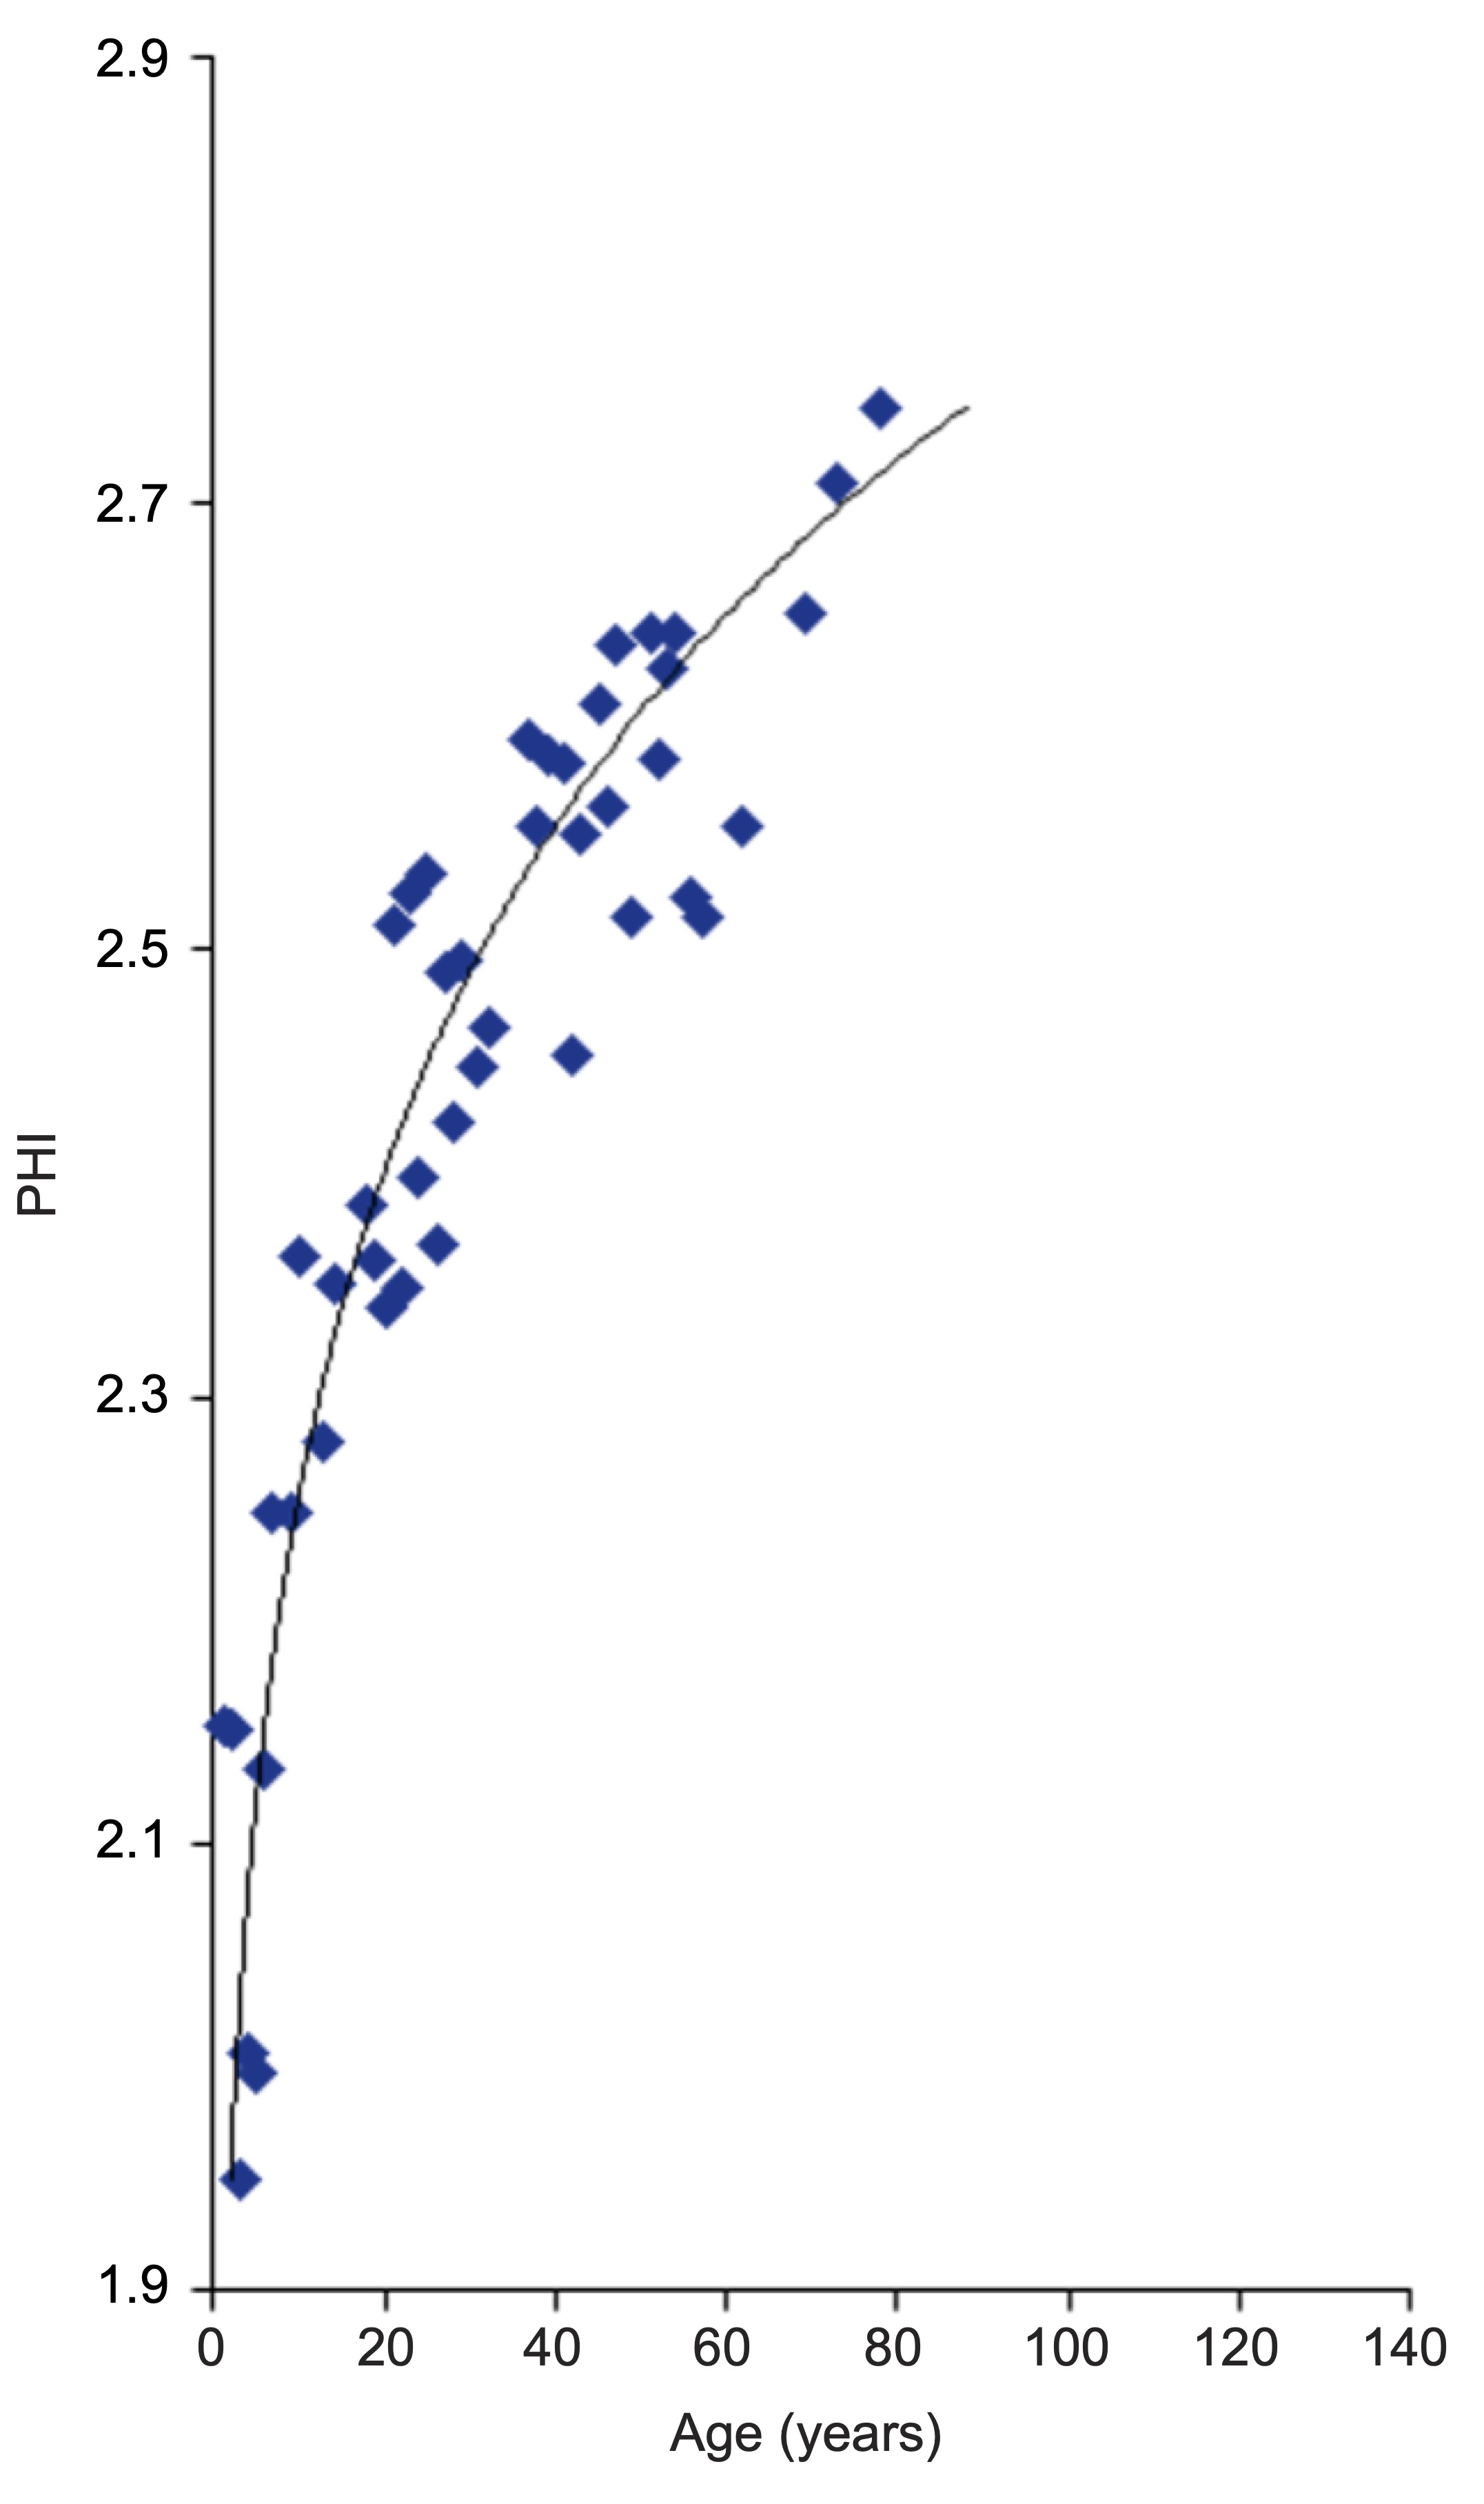 graph of the correlation between PHI and age for flexible pavement